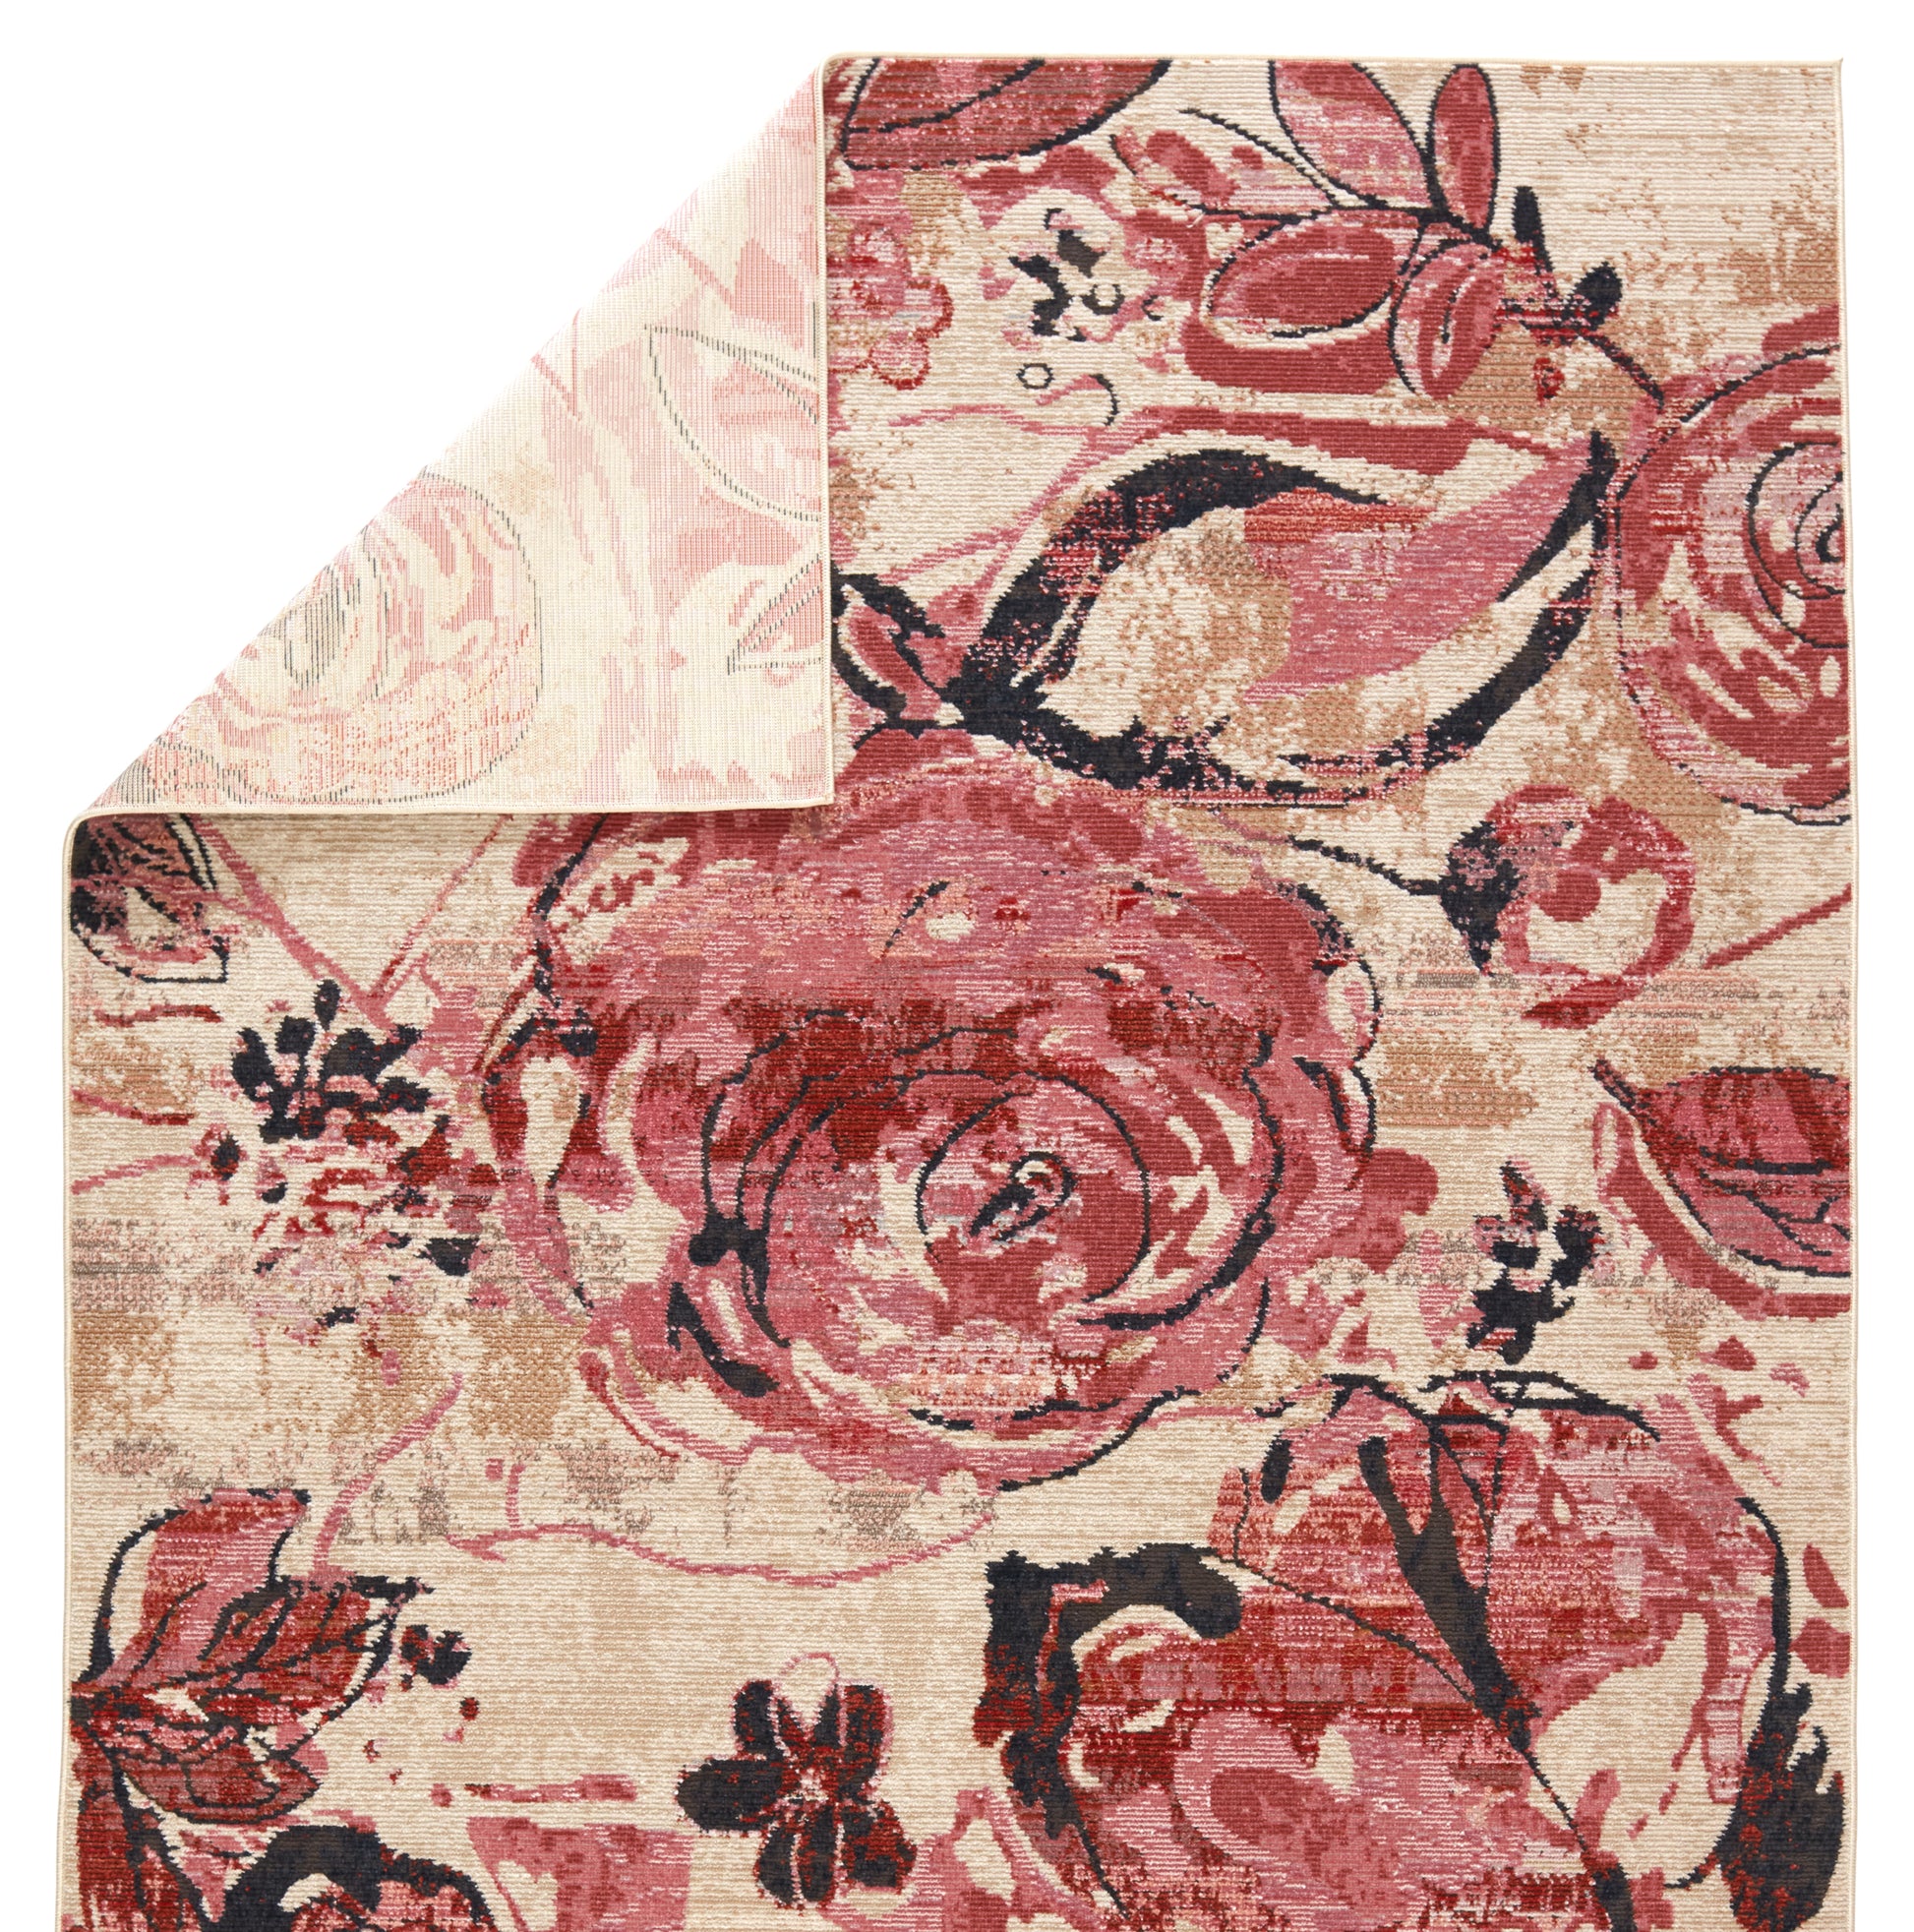 Jaipur Swoon Hermione Swo14 Pink Area Rug